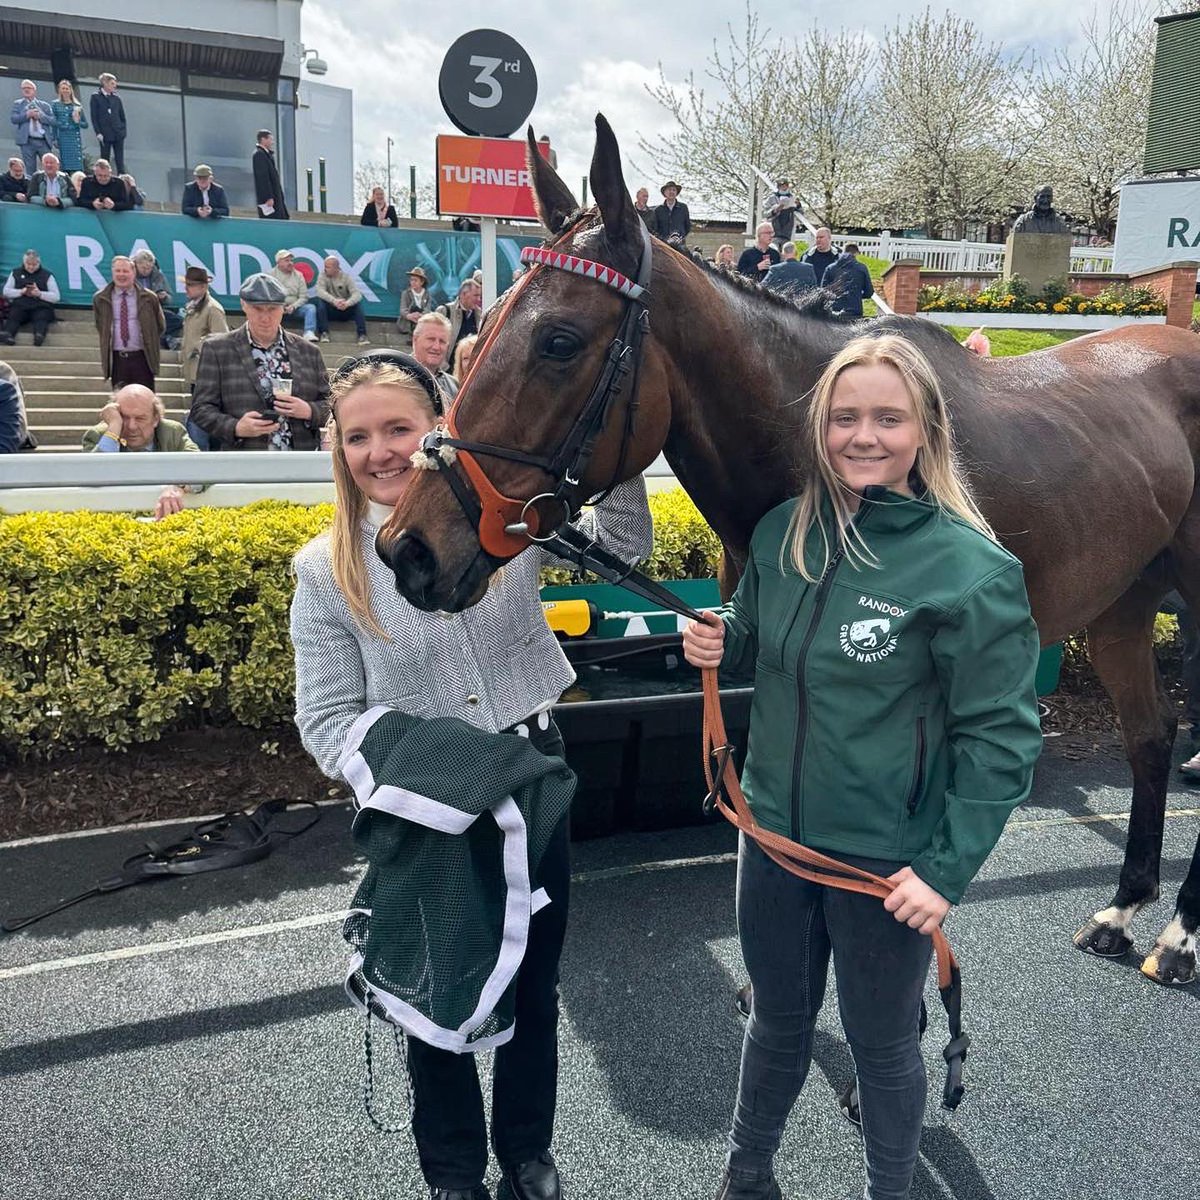 Thrilled to see Bugise Seagull finish a brilliant 3rd in the Grade 1 Novices’ Hurdle at Aintree under @sean_bowen_ Bug showed great potential as a graded horse and very excited to see what else he can do! ⭐️ Again, huge congratulations to his owner Grant Leon 👏🏻👏🏻